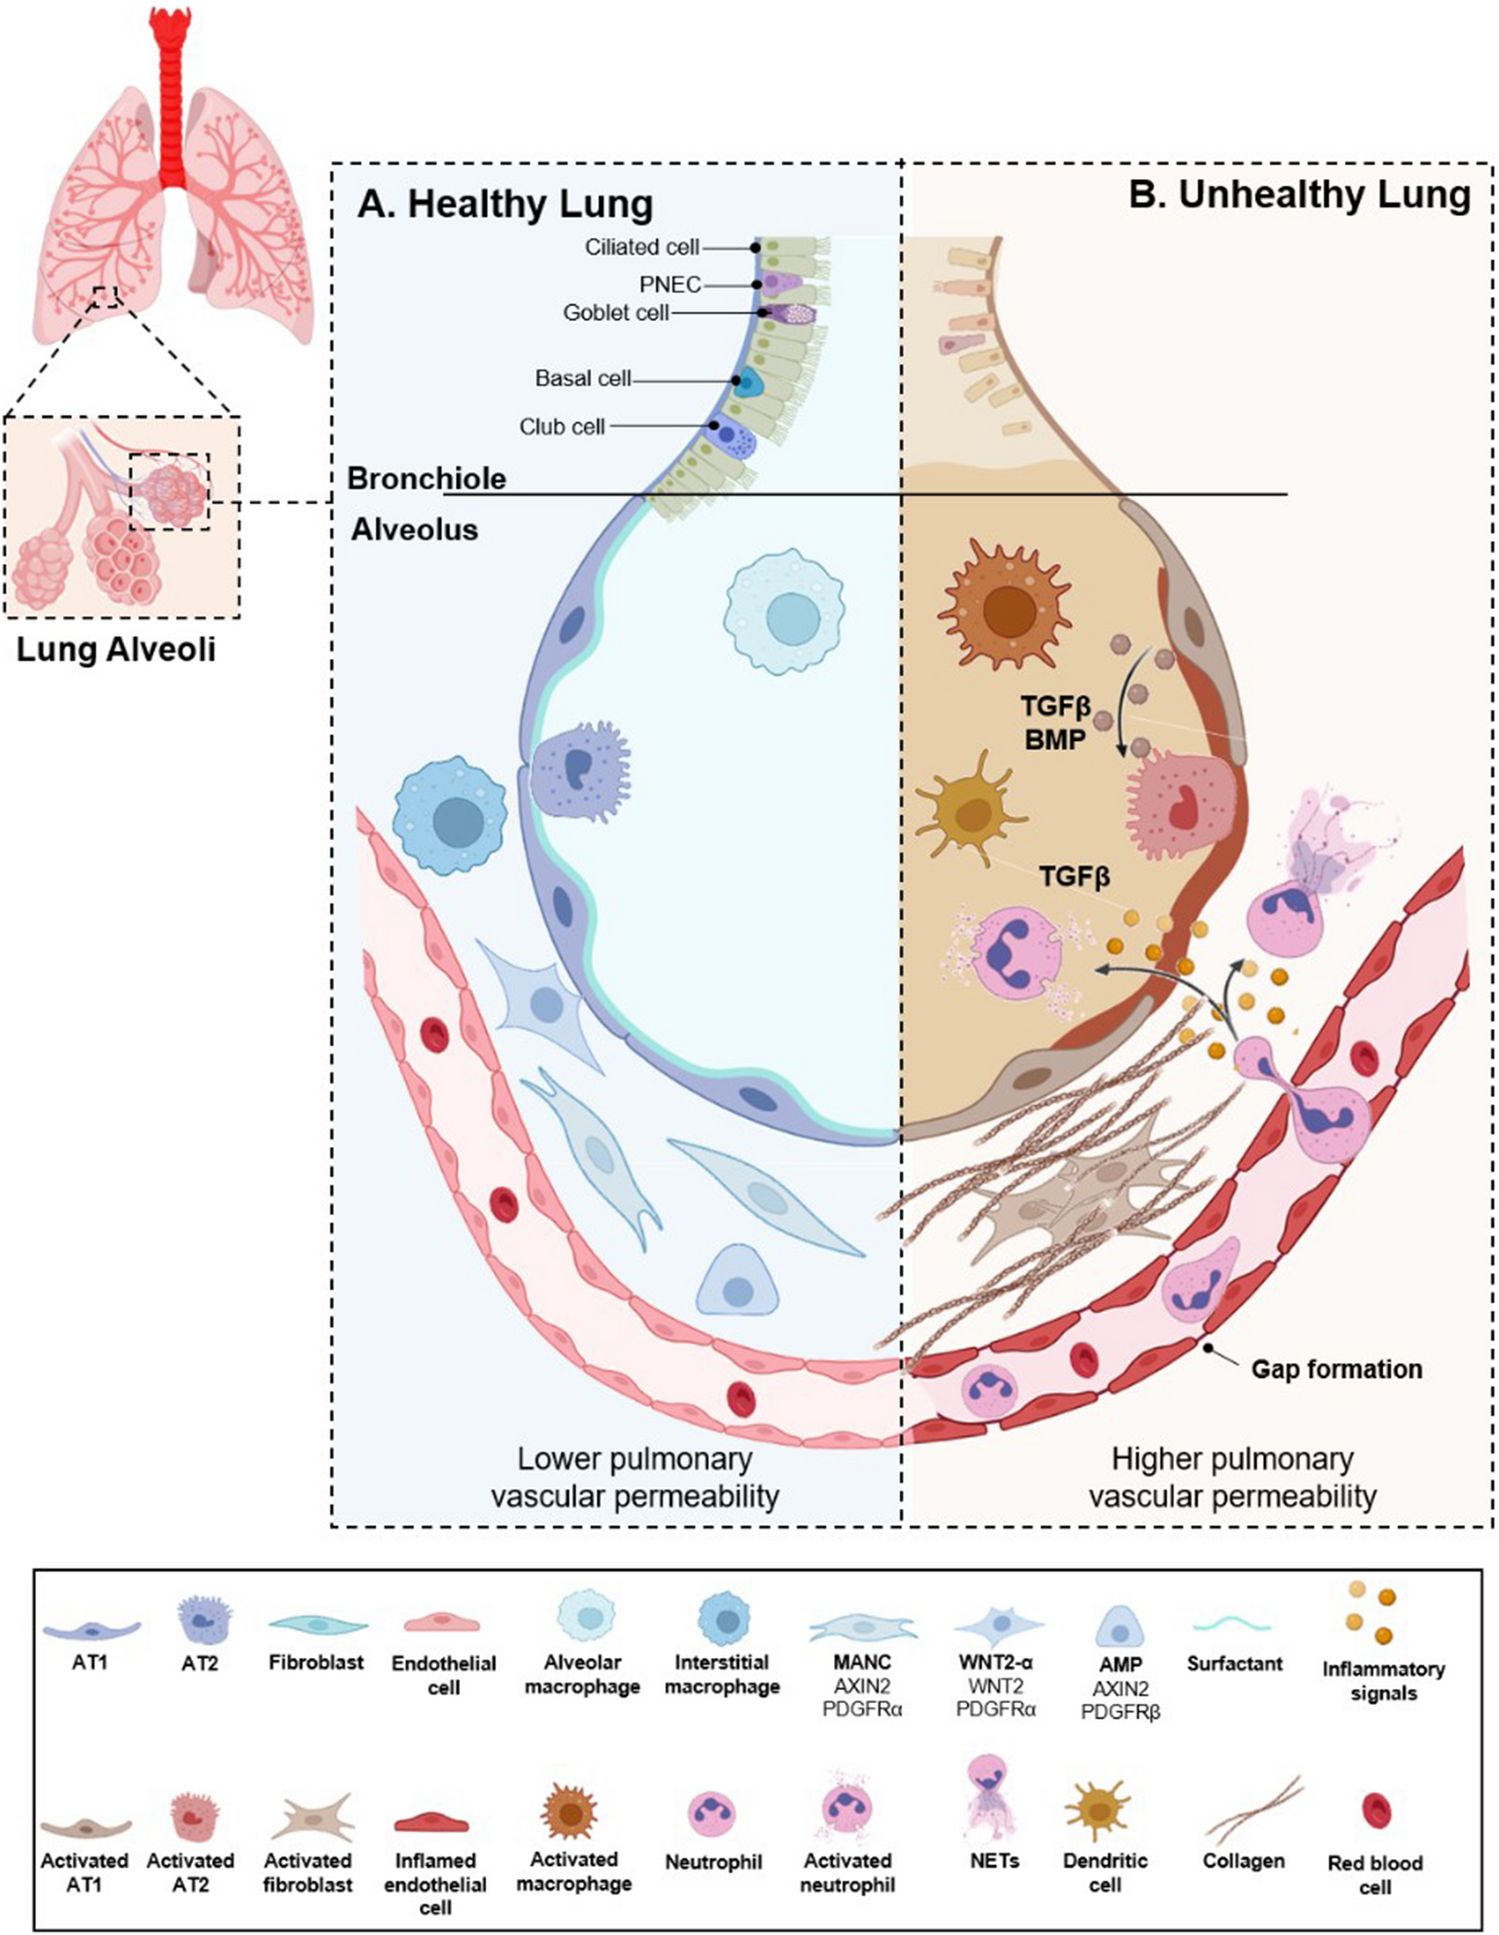 Cancer treatments as paradoxical catalysts of tumor awakening in the lung